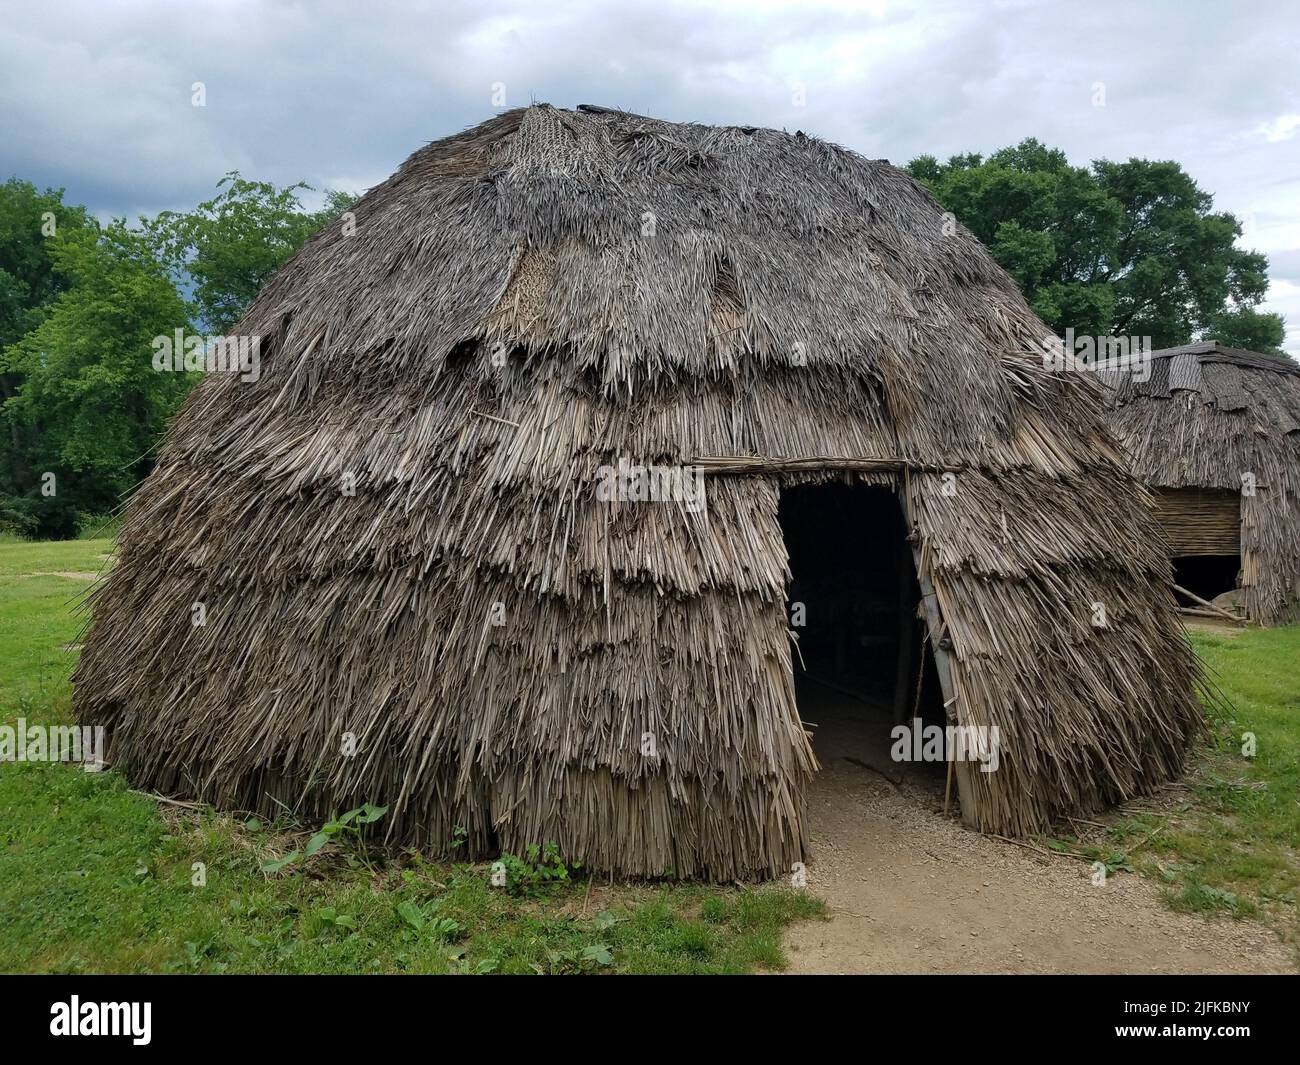 LUSIGA Man Made Thatch Fake Straw, Straw Roof Thatch Straw Roof